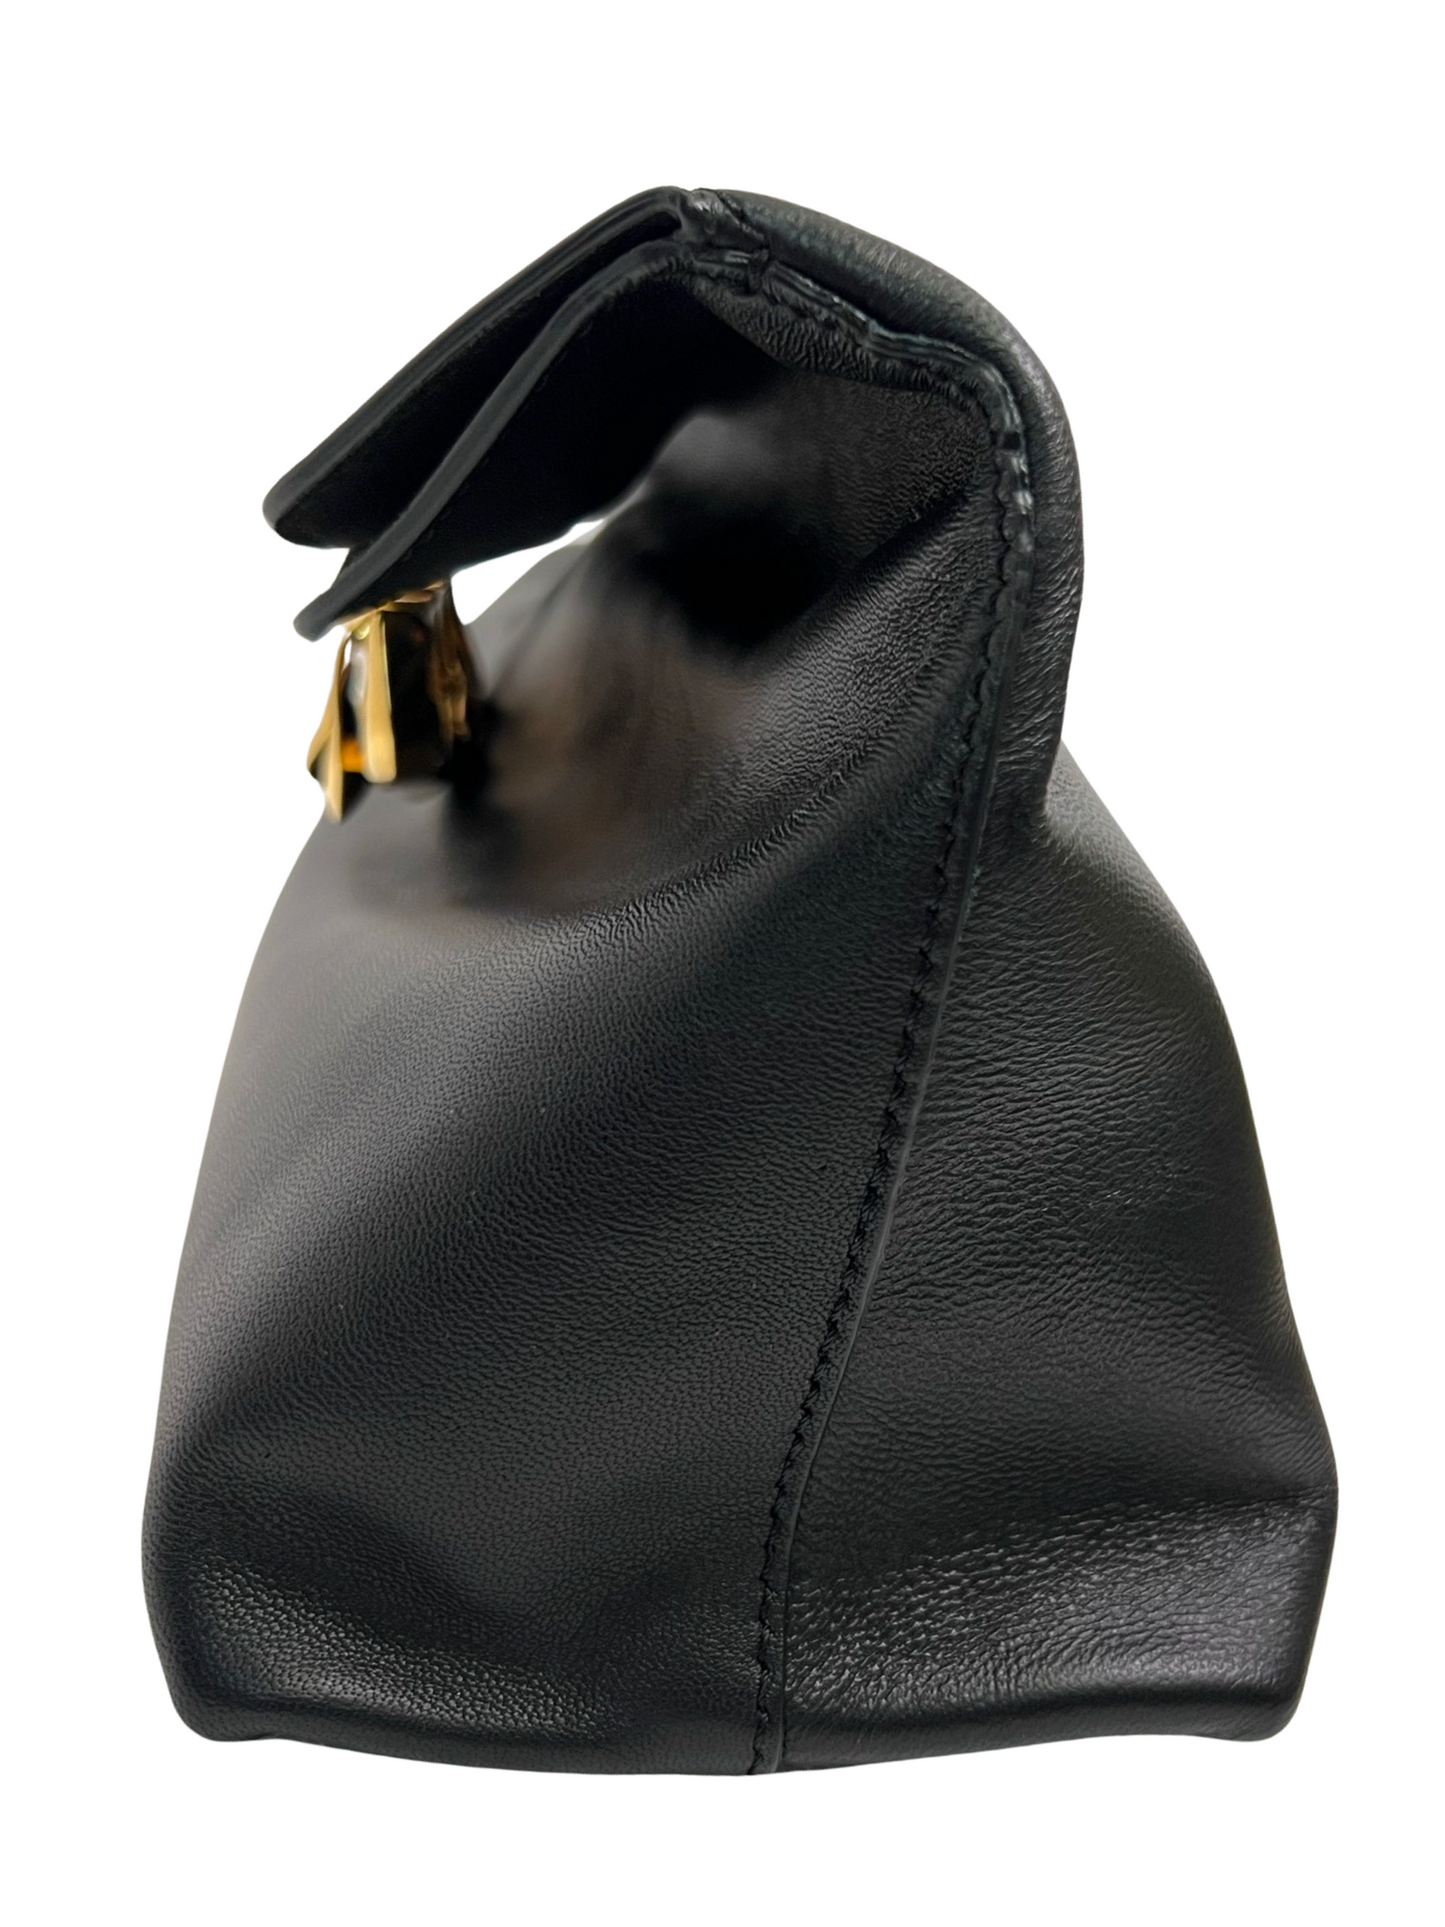 ALEXANDER McQUEEN - Sculptural pouch in nappa leather